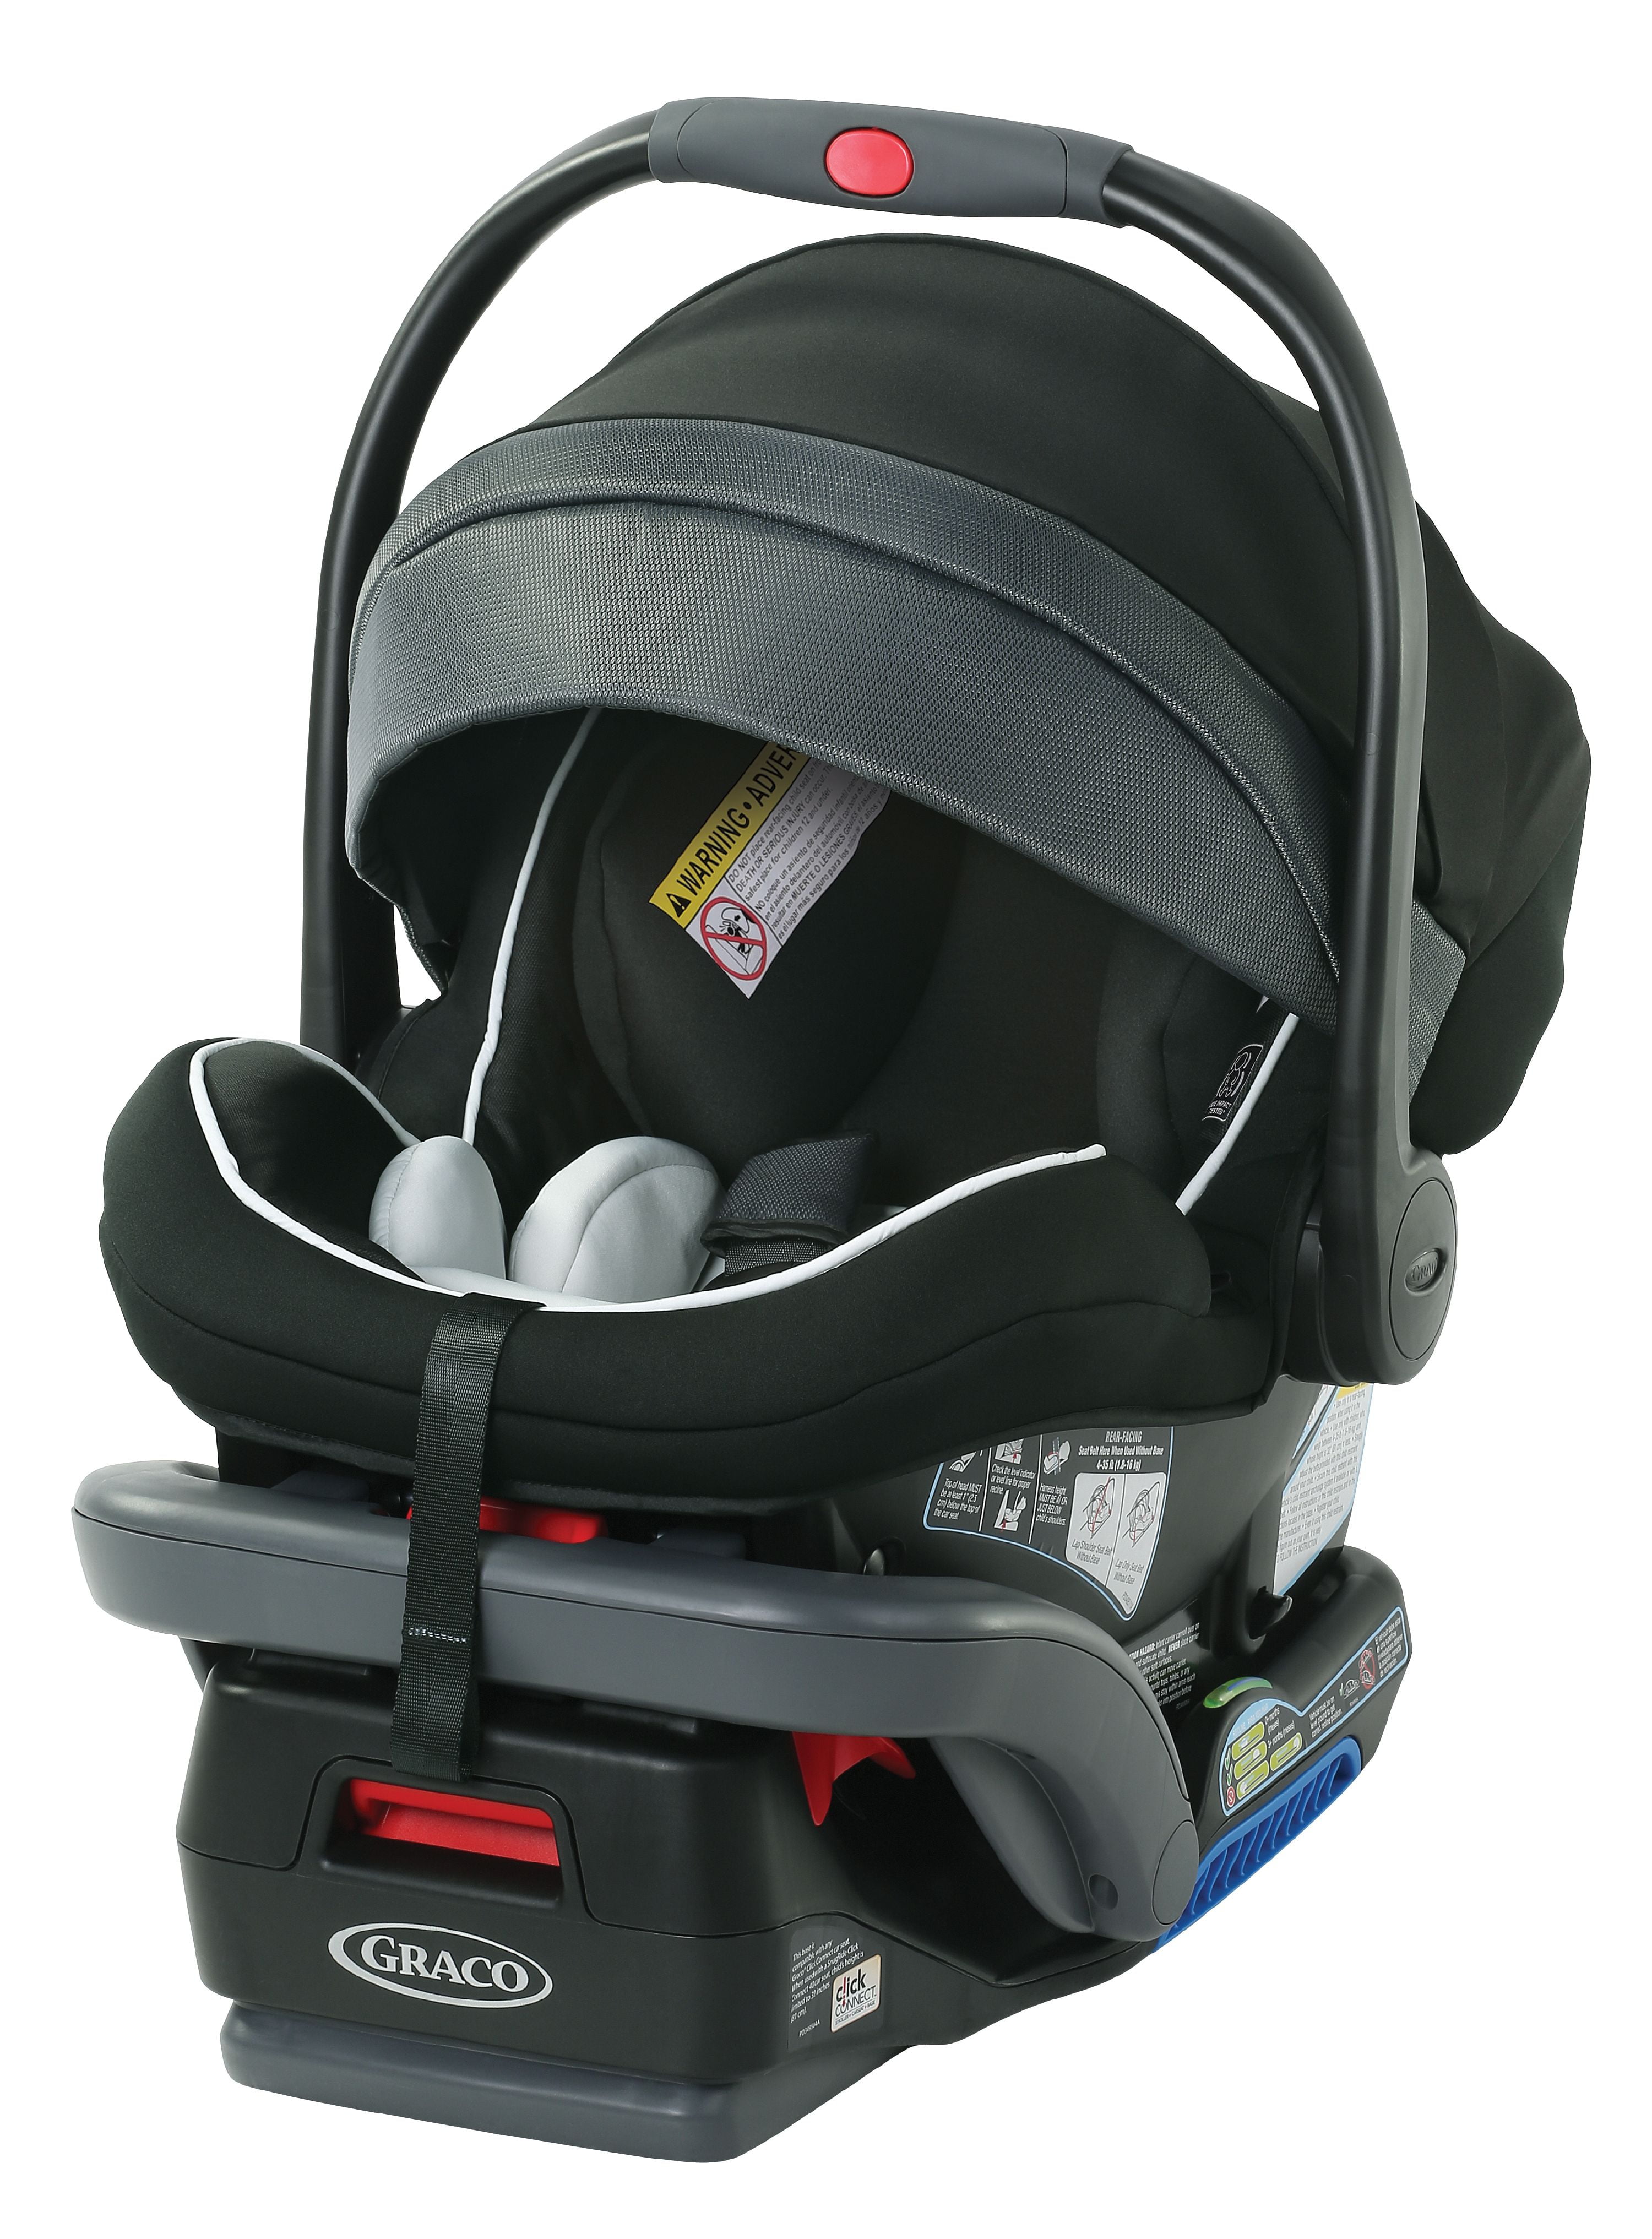 Graco Snugride Snuglock 35 Infant Car Seat Tenley Gray Com - How To Install Graco Infant Car Seat With Seatbelt